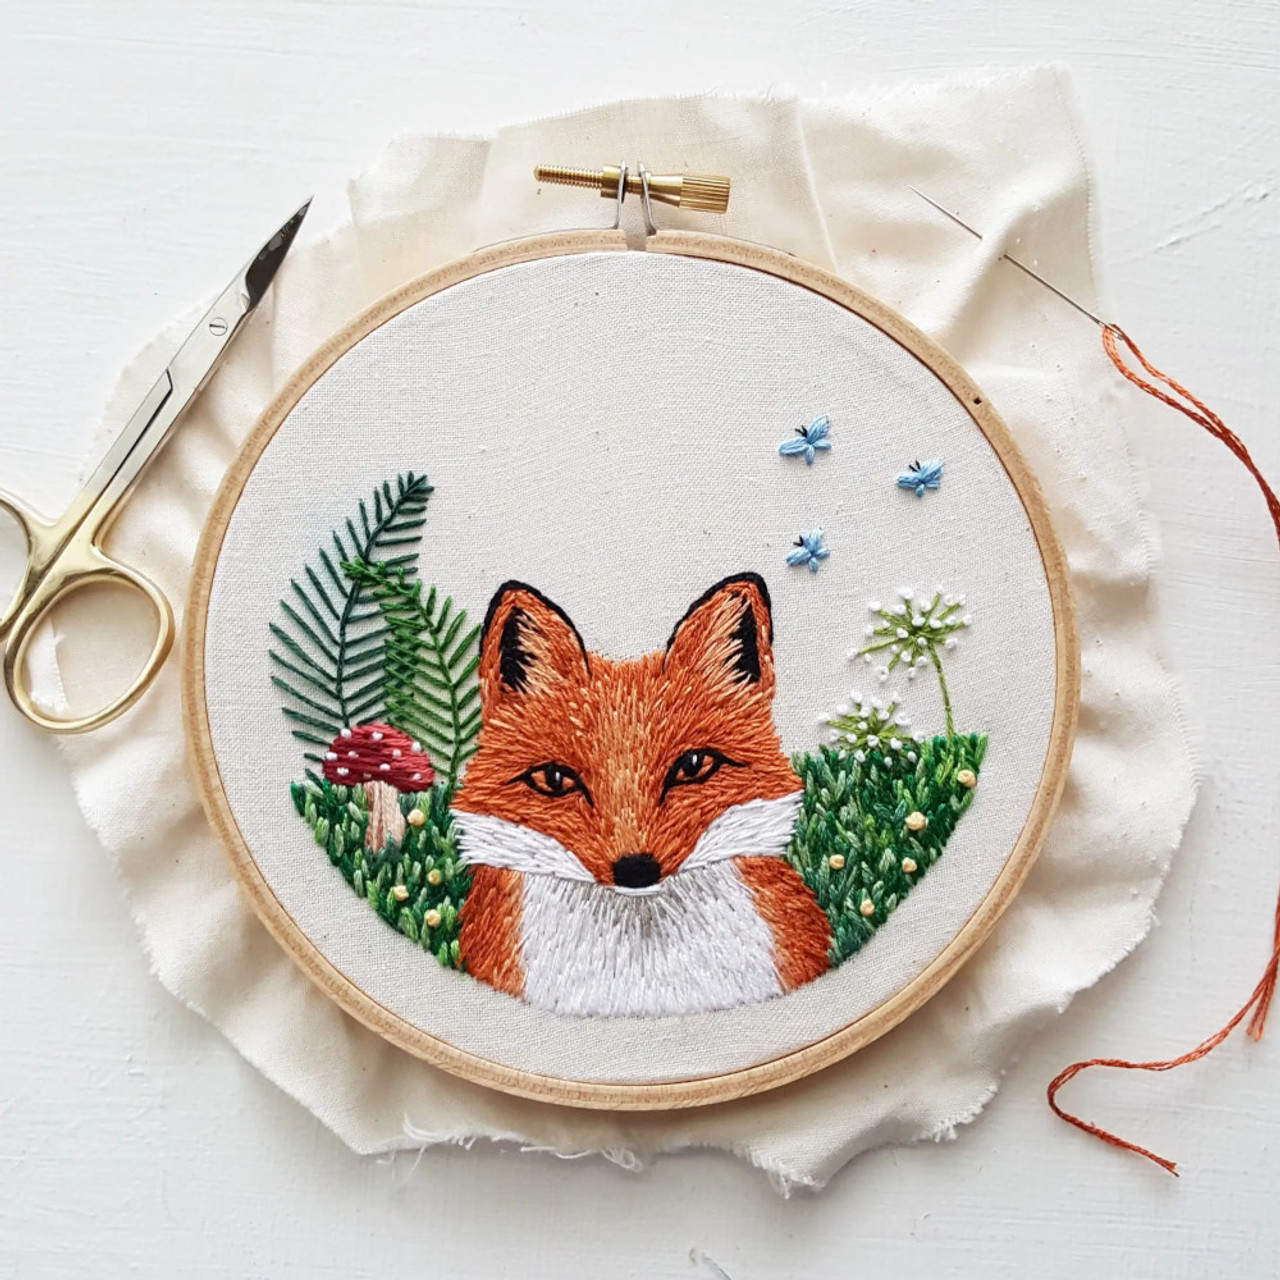 Cats & Full Moon Embroidery Kit By Jessica Long Embroidery